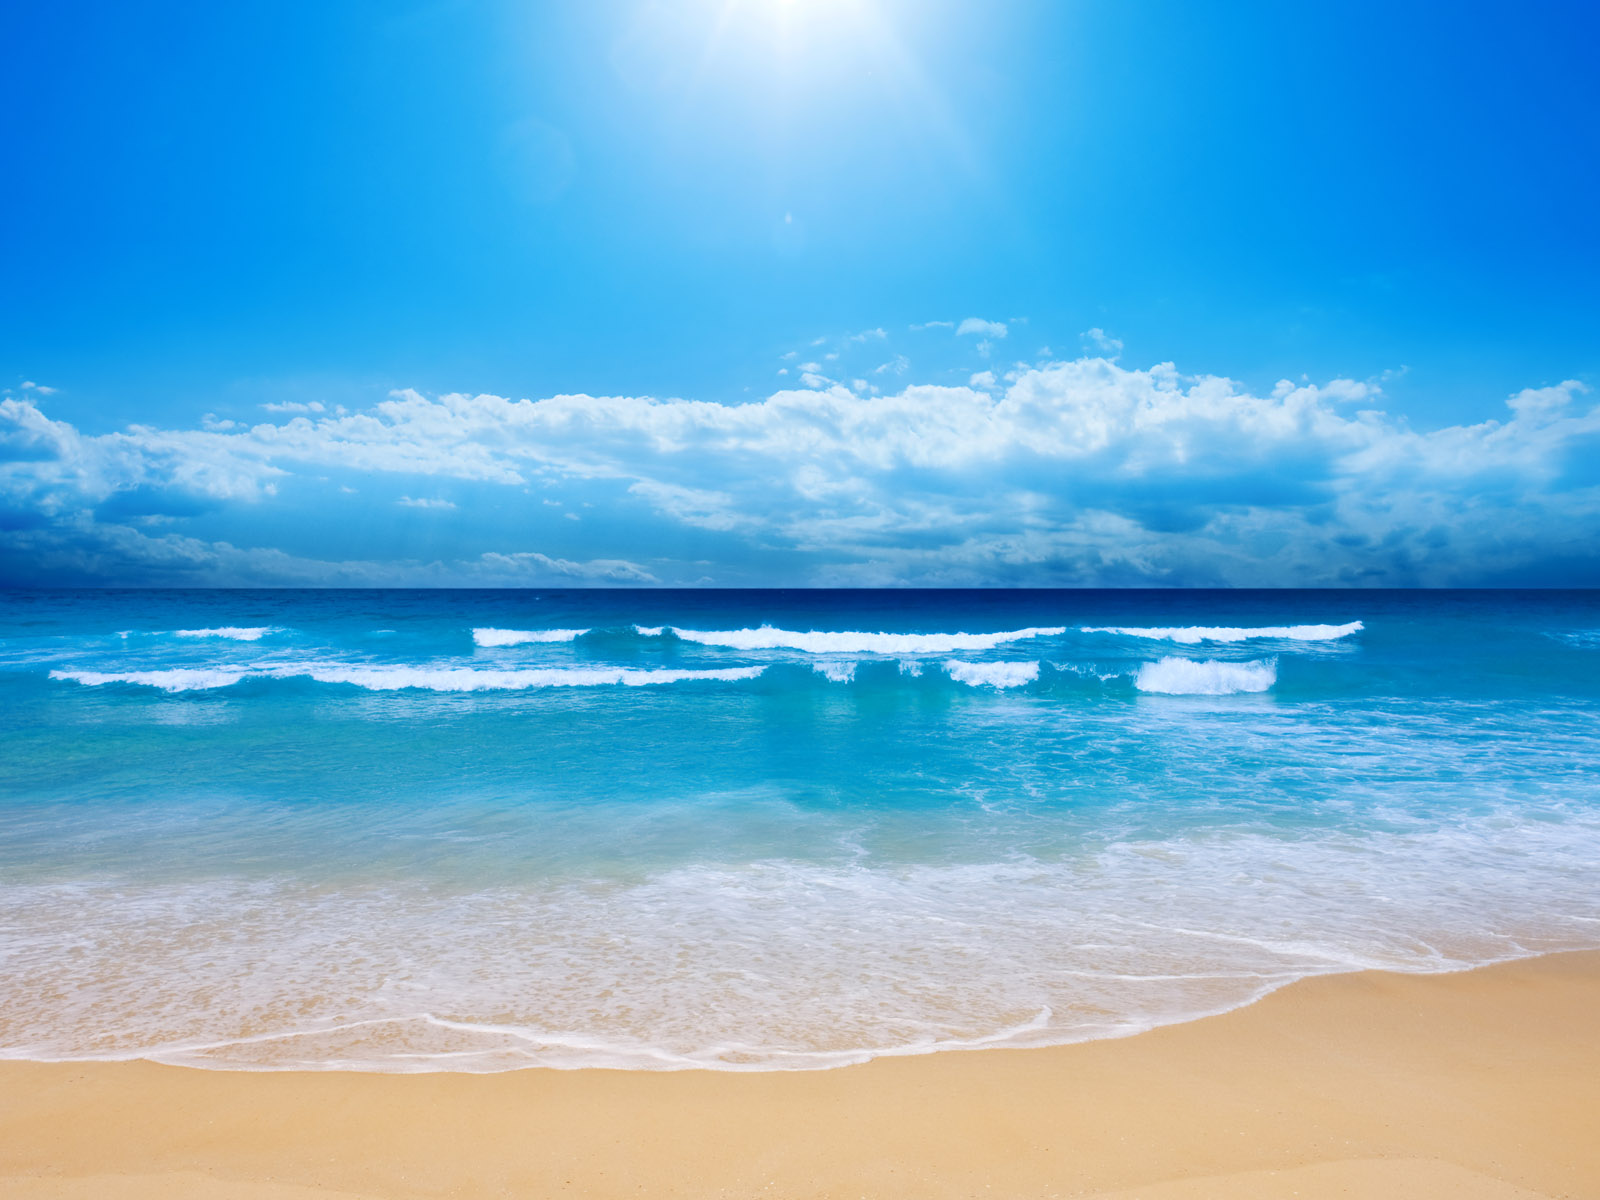 Place For HD Wallpapers Desktop Wallpapers Beach wallpapers 1600x1200